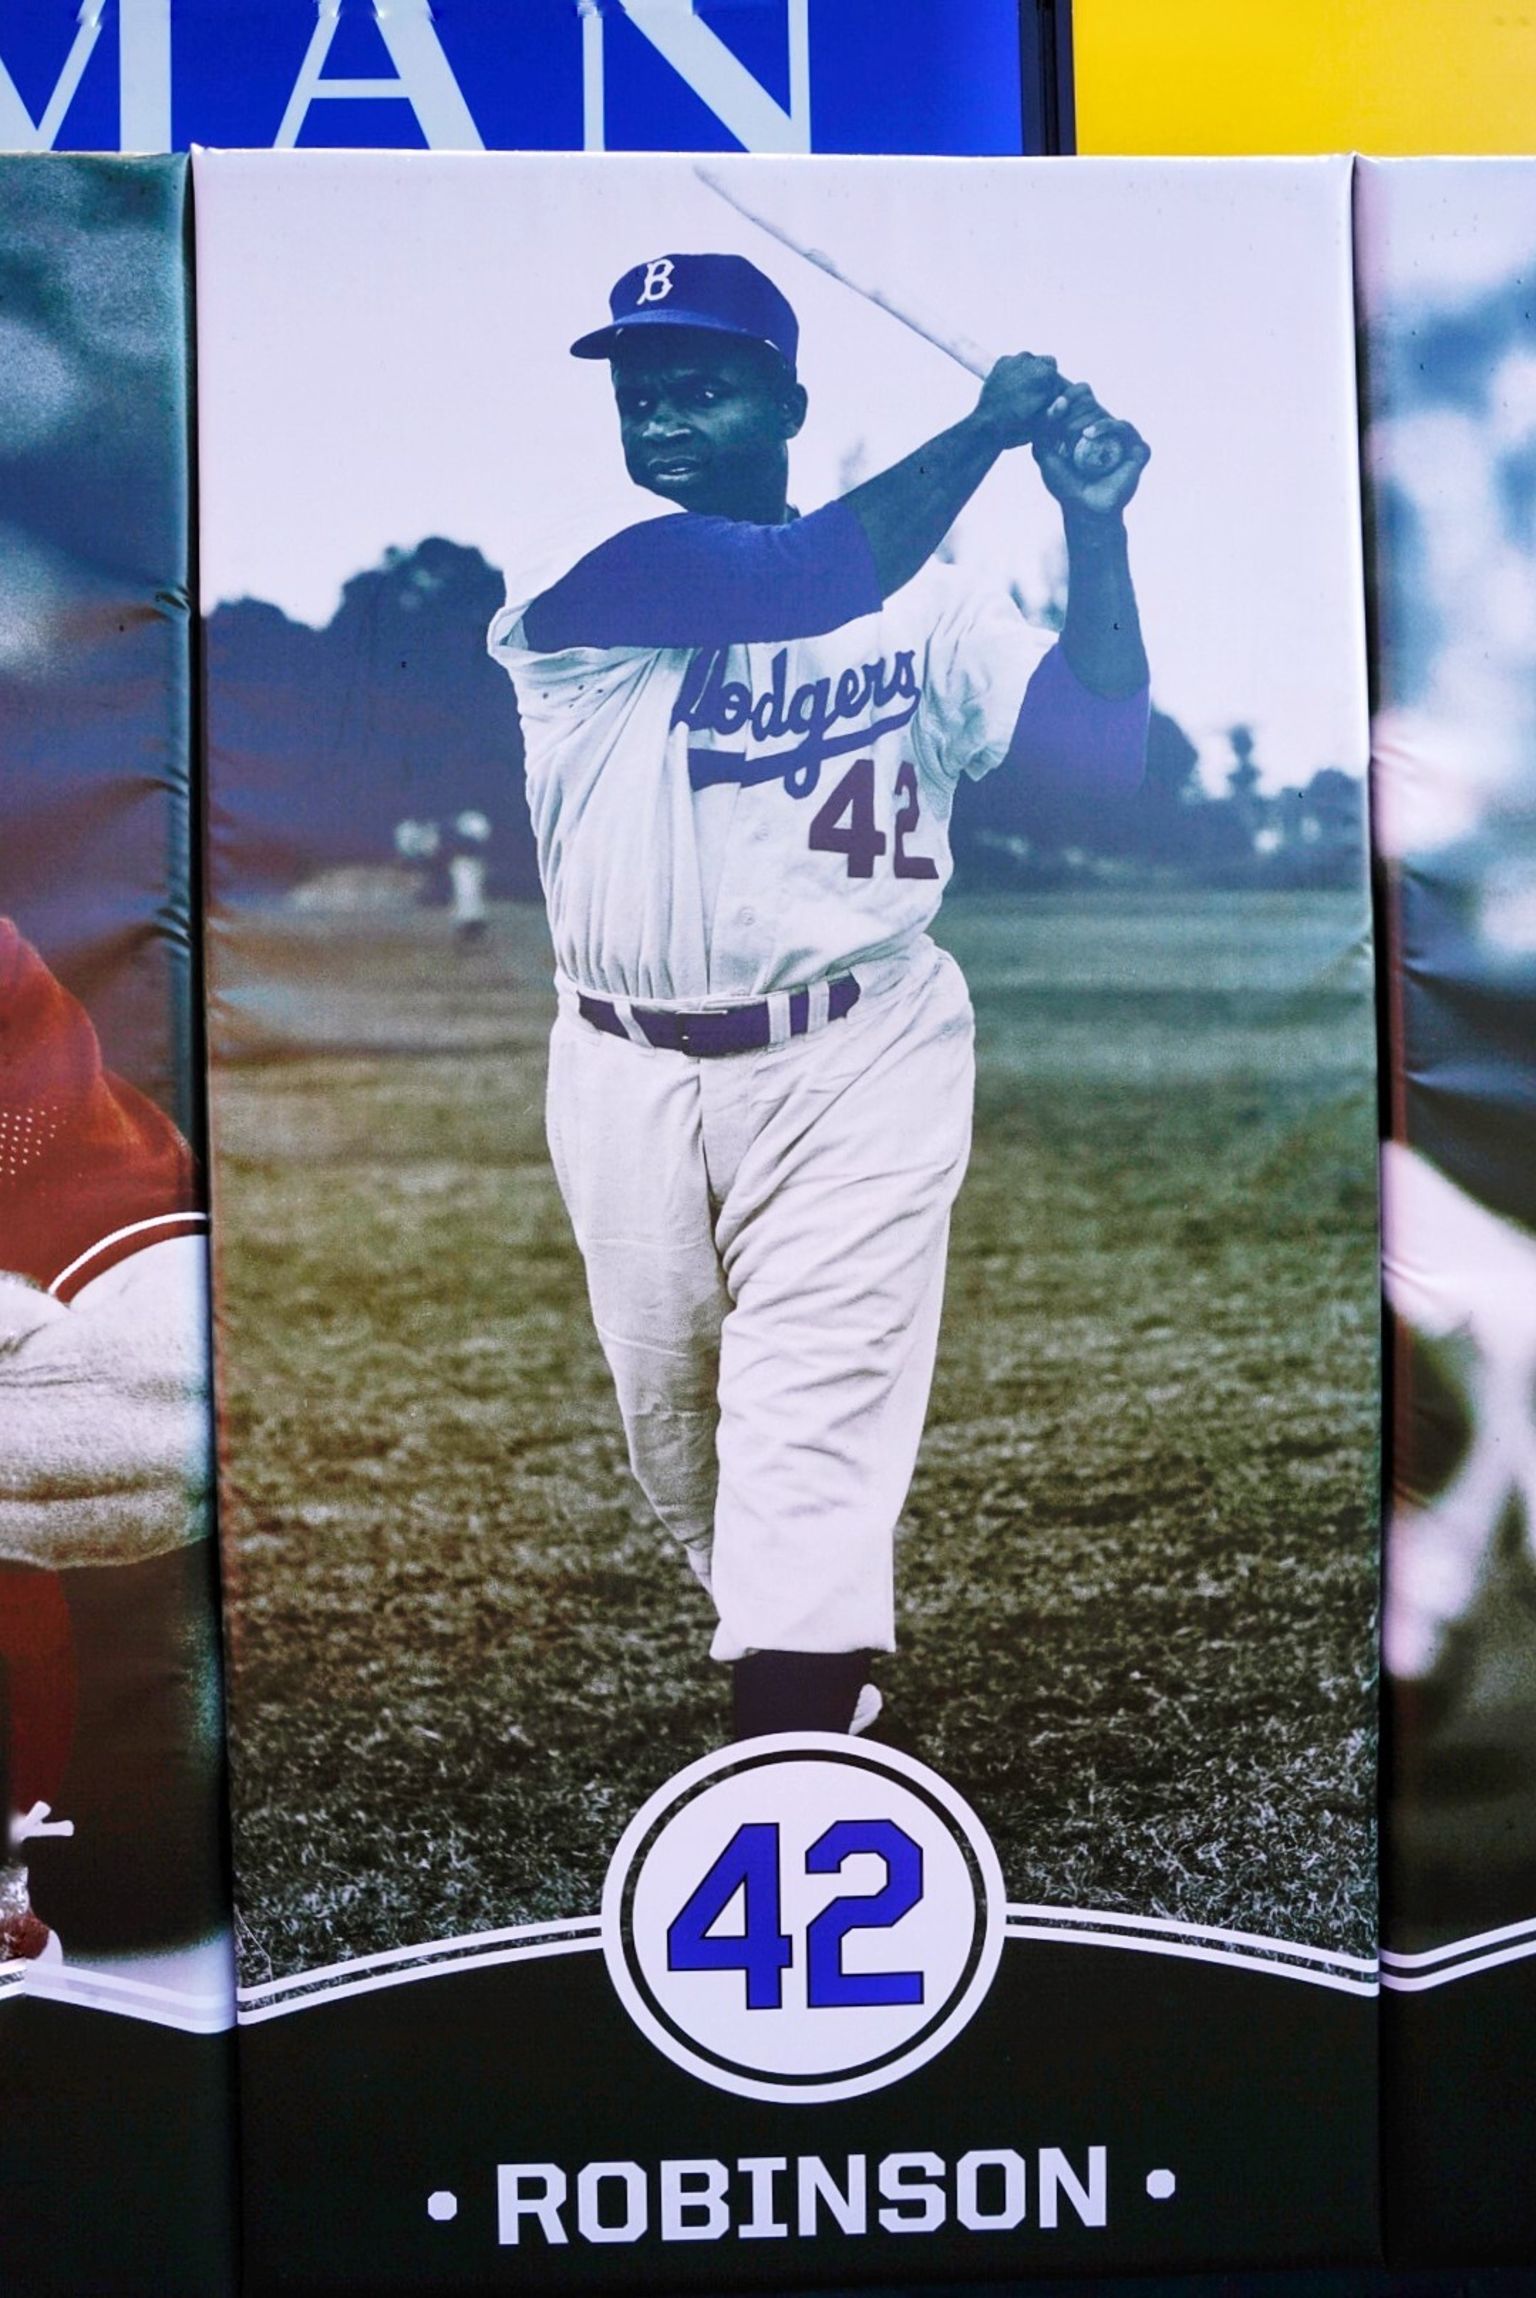 Celebrate baseball great Jackie Robinson with this poster